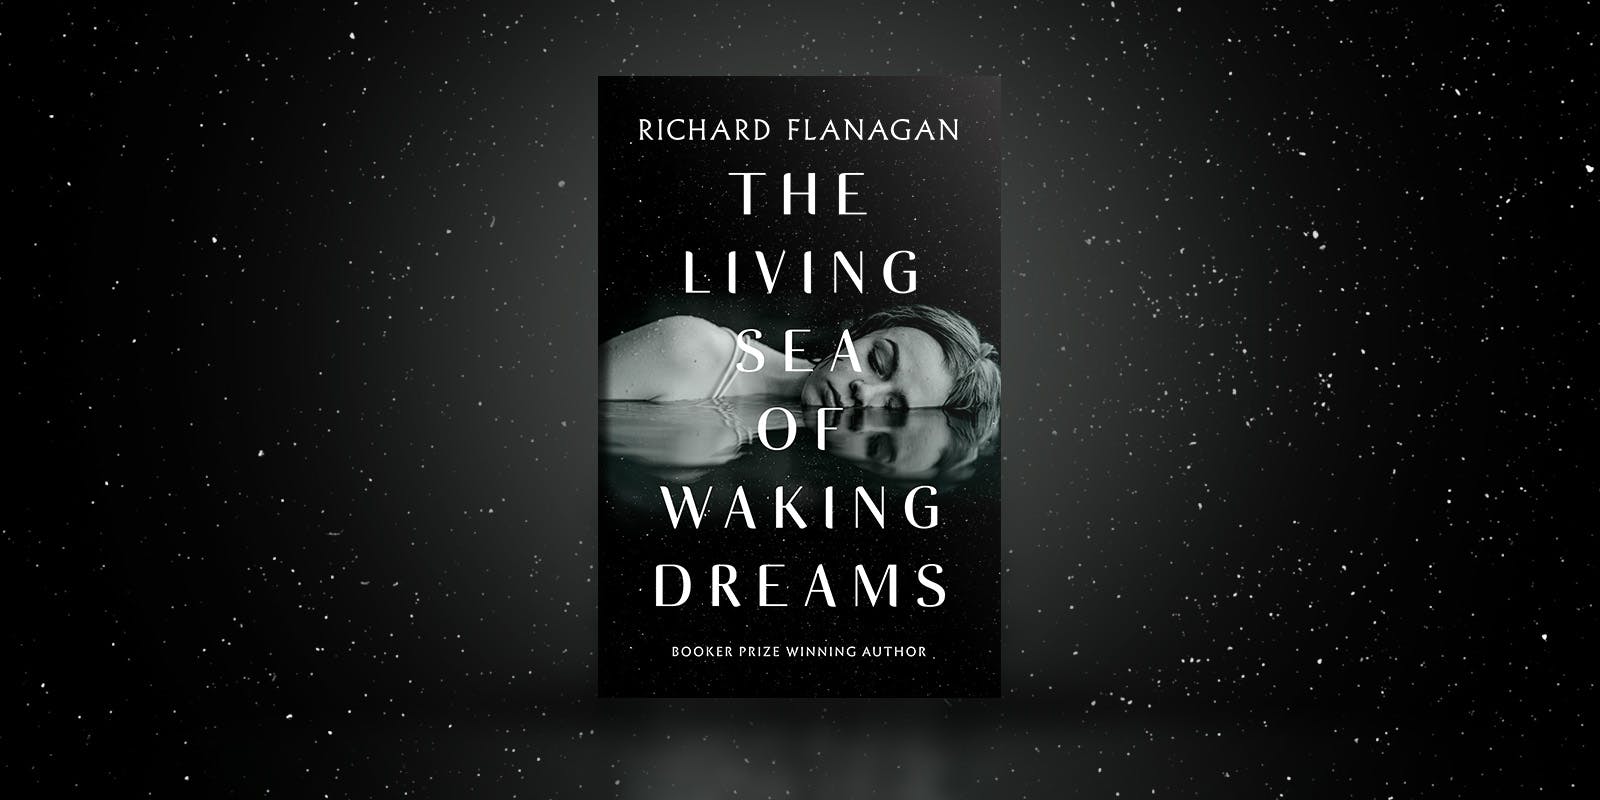 The Living Sea of Waking Dreams